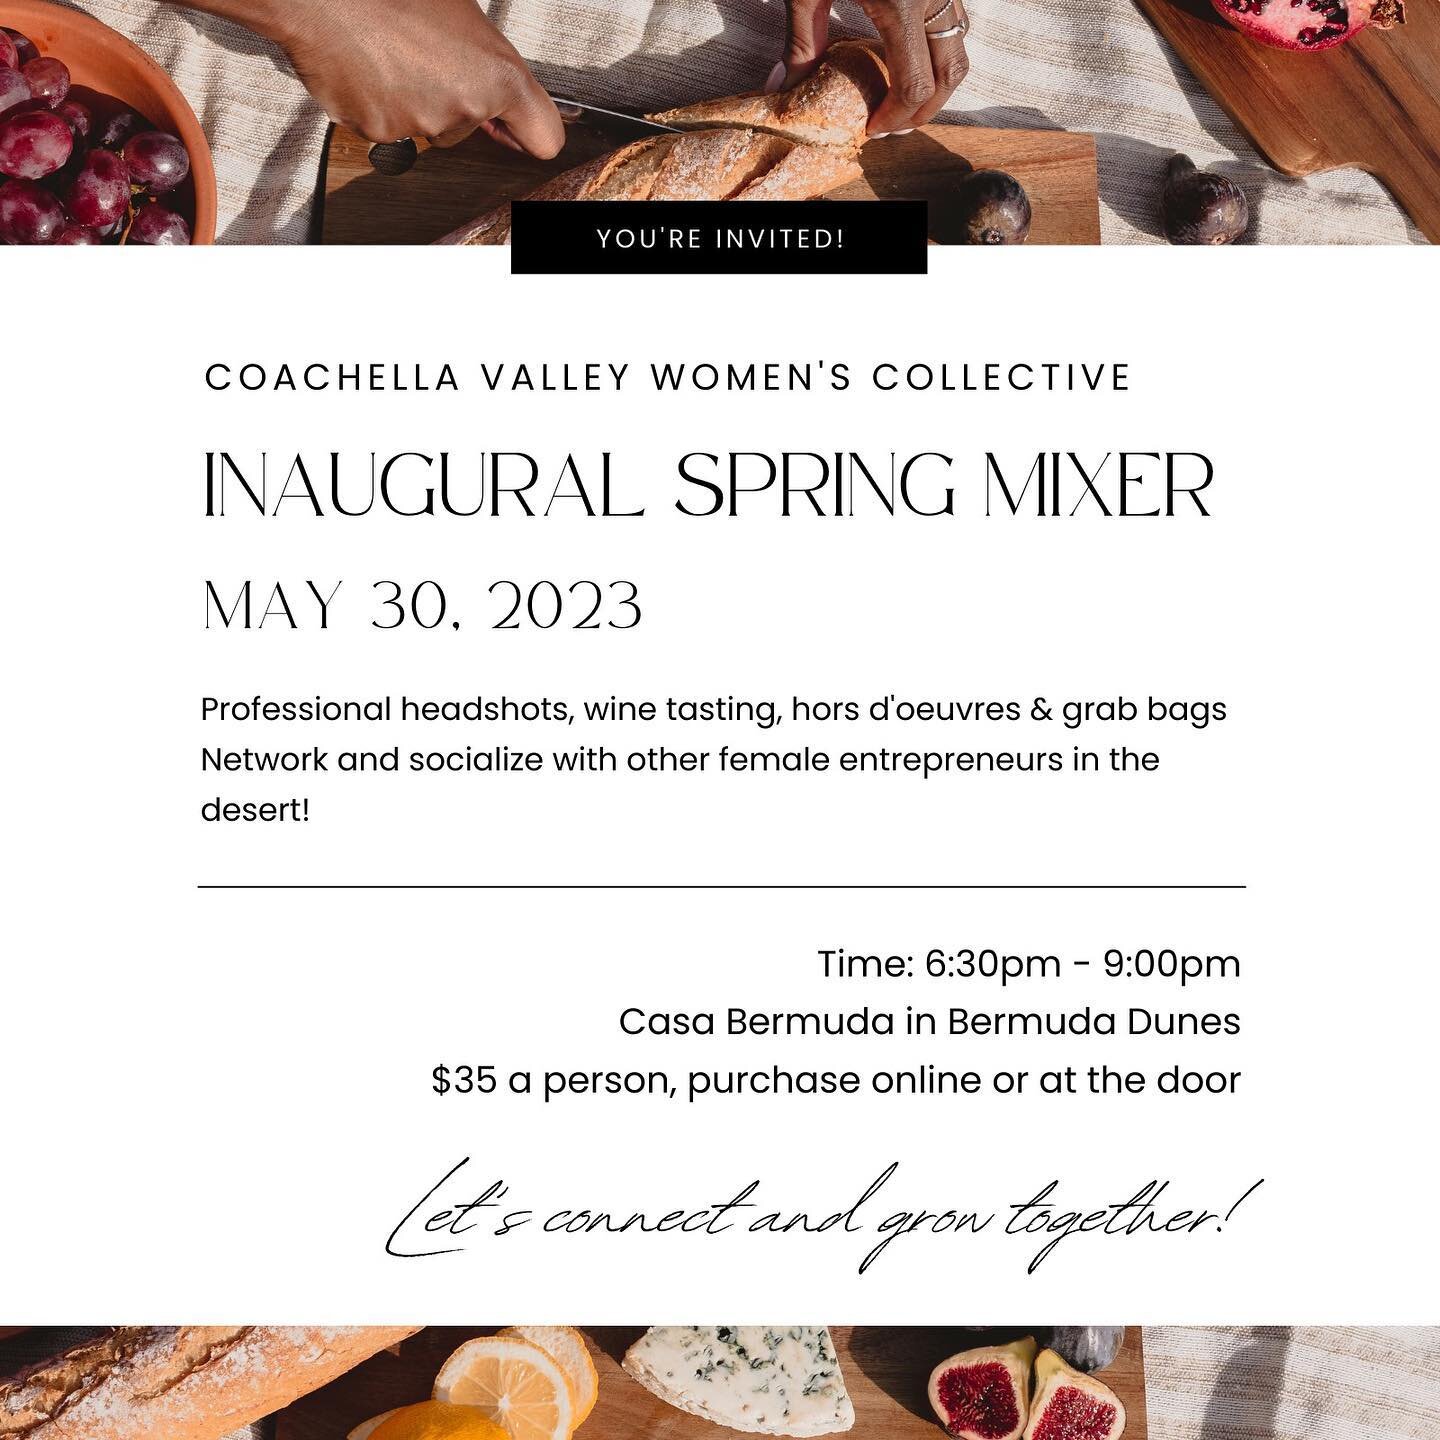 Coachella Valley Female Entrepreneurs, let&rsquo;s get together! Join us for the Coachella Valley Women&rsquo;s Collective Inaugural Spring Mixer on May 30th! 

The idea began when @carolinepollyphotography, @mariahshalom, and I were looking for ways